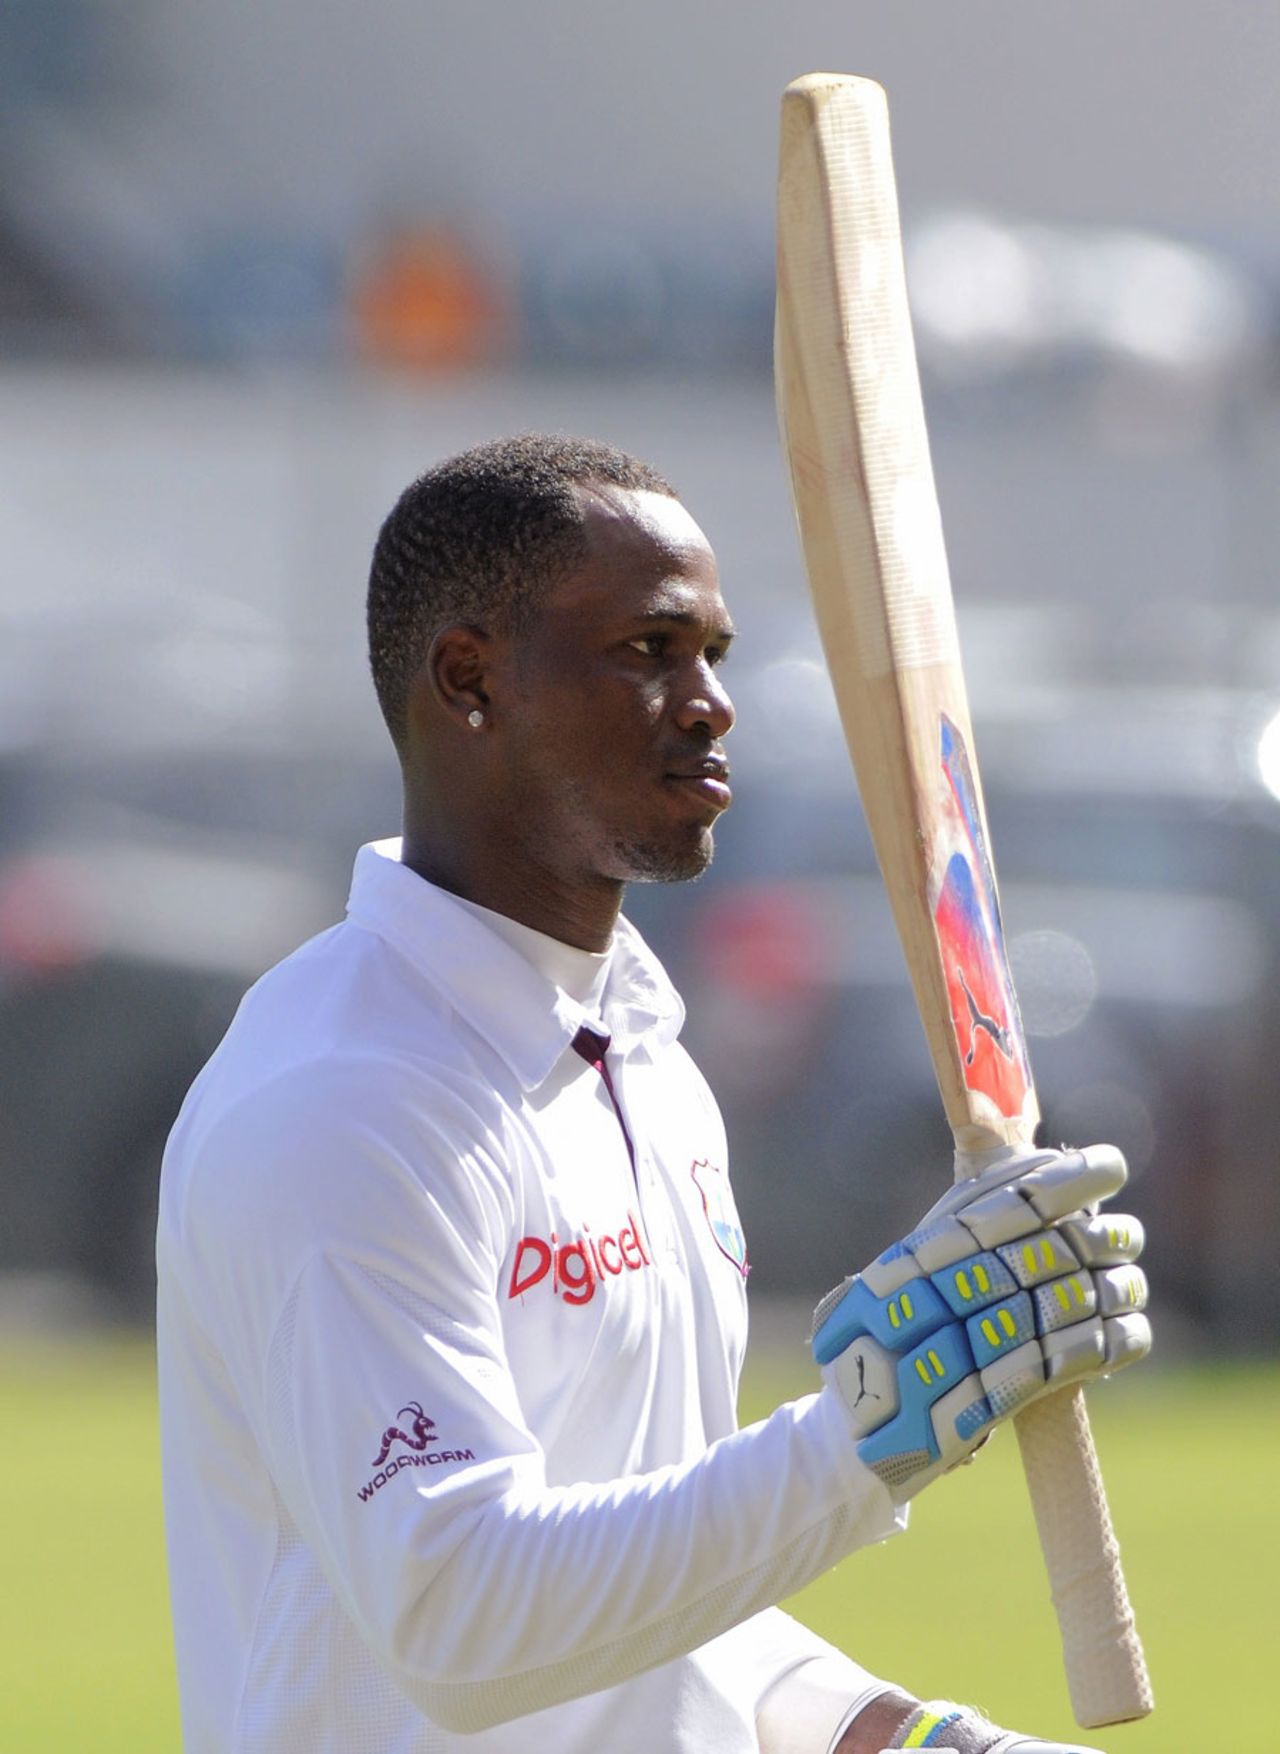 Marlon Samuels made 123 before he was dismissed, West Indies v New Zealand, 2nd Test, Jamaica, 2nd day, August 3, 2012